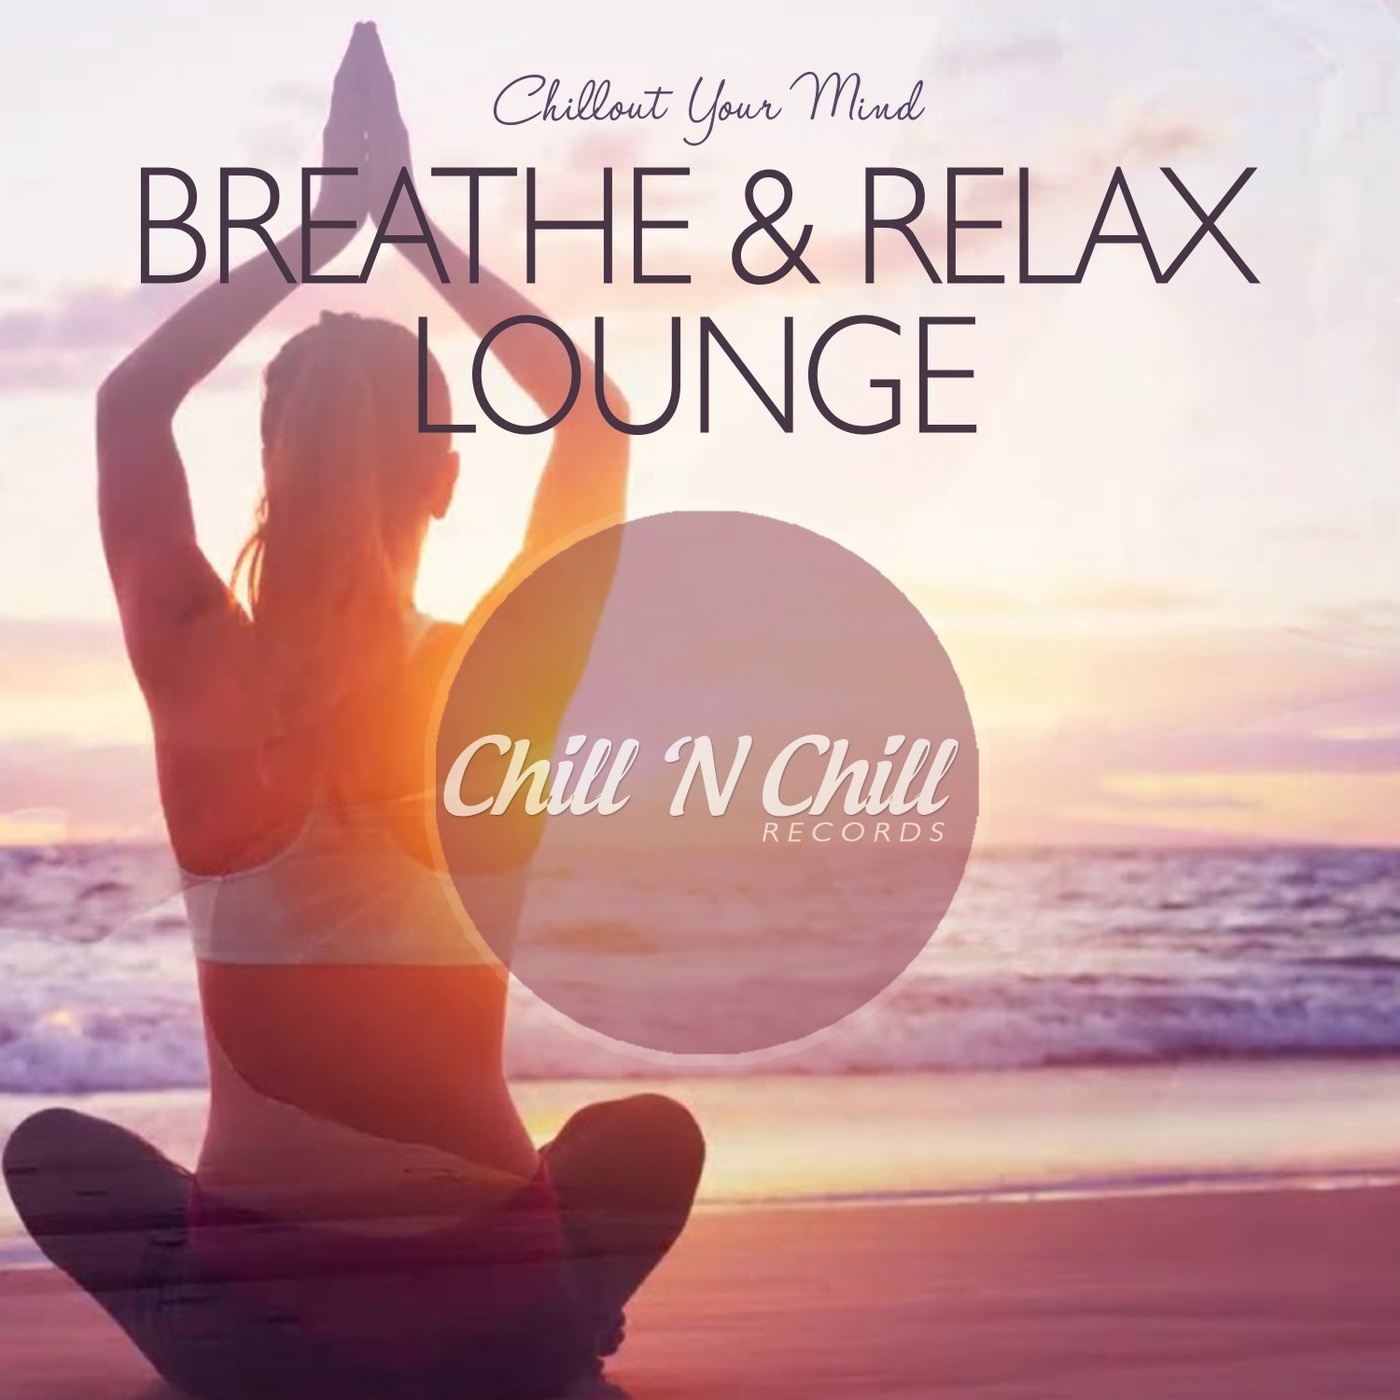 chill n chill records《breathe relax lounge：chillout your mind 1